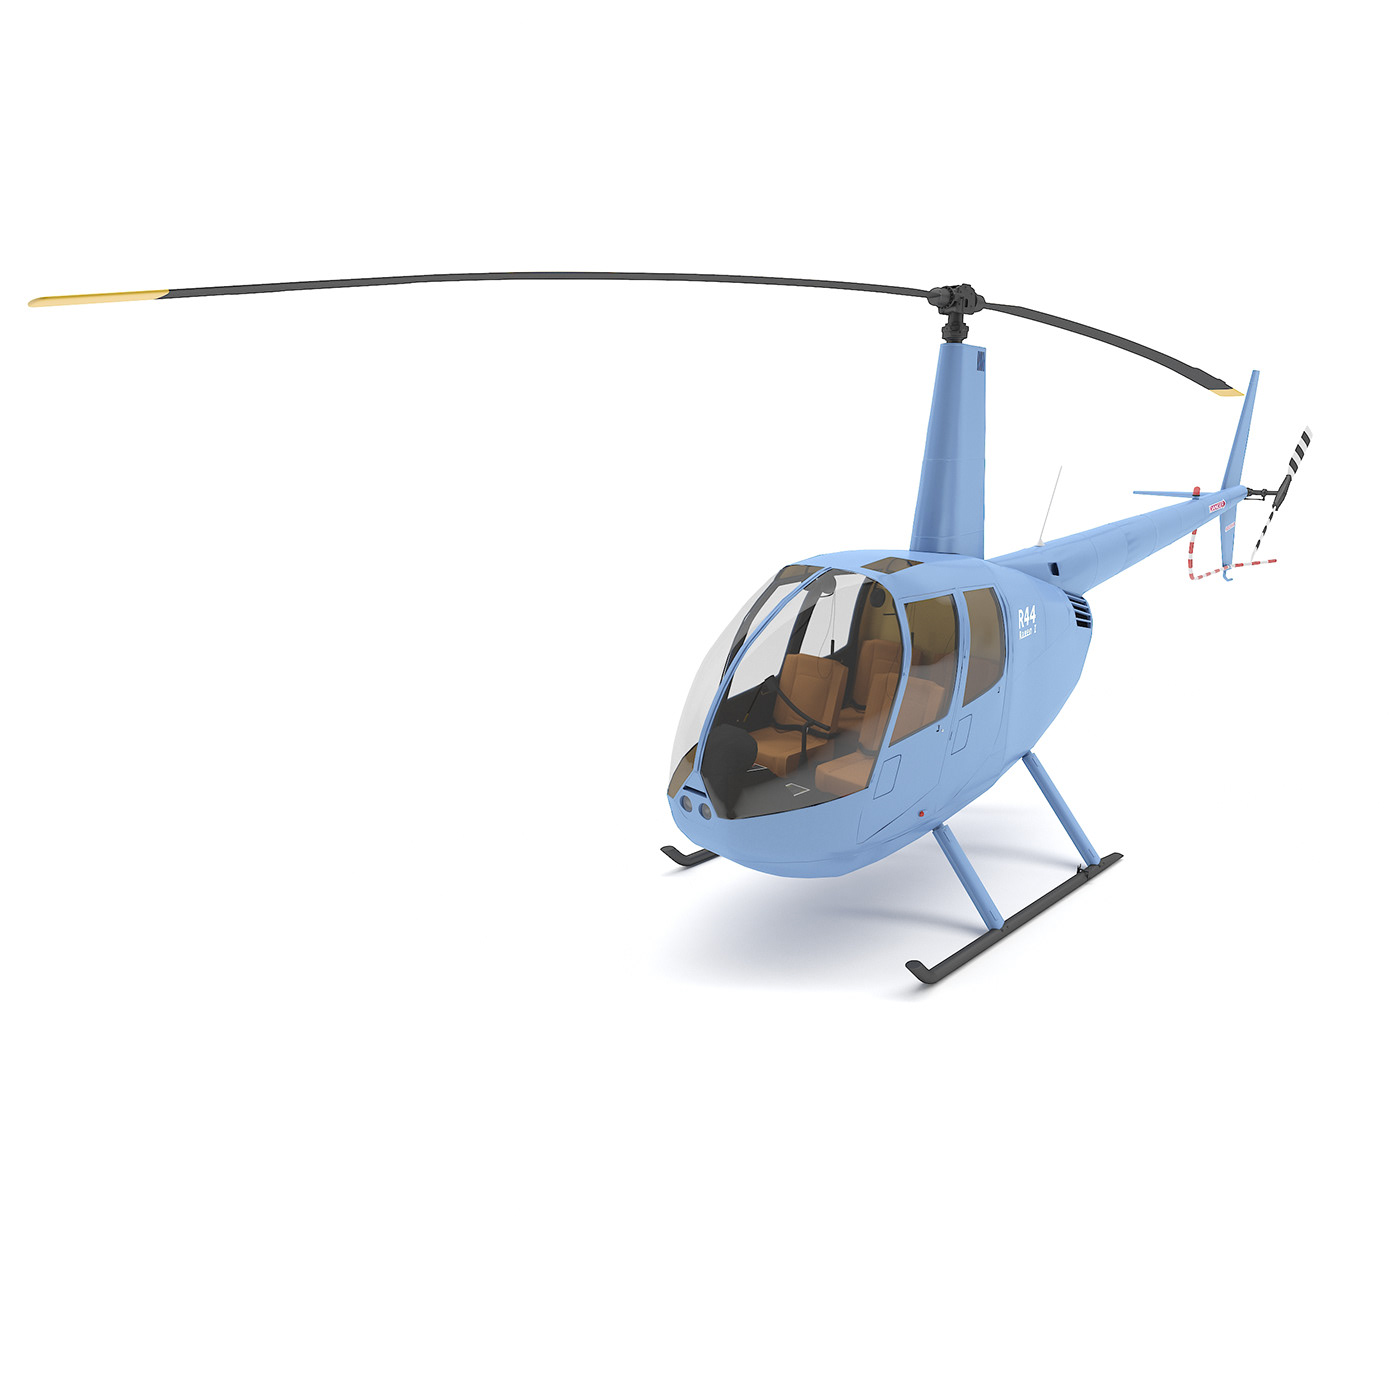 3dsmax vray adventure aviation copters flight helycopter model plane rotor Travel